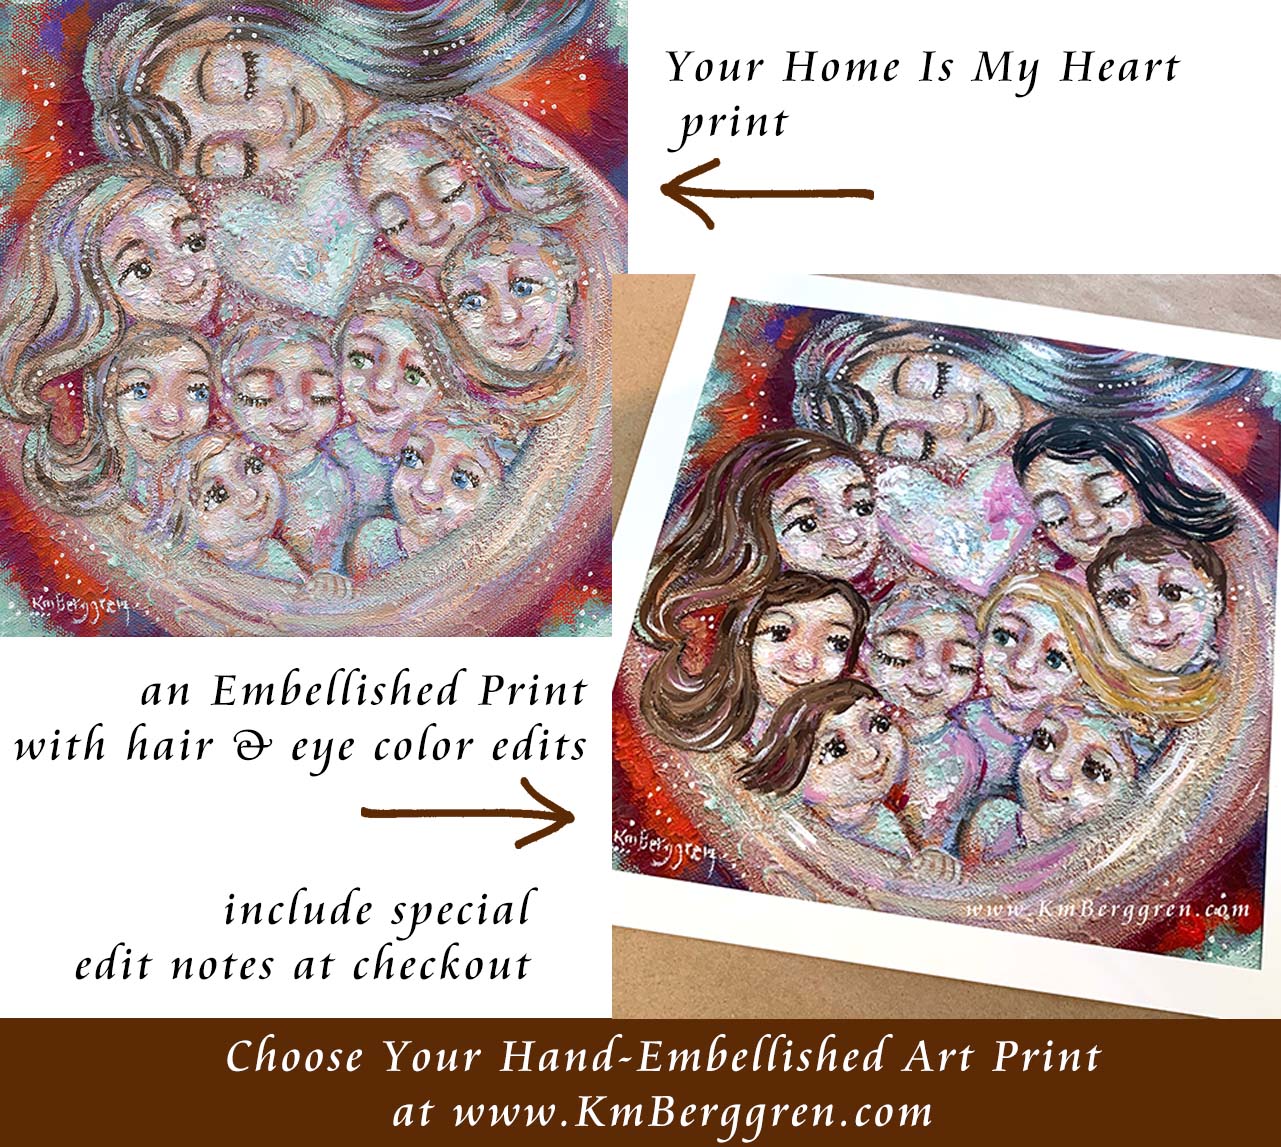 eight kids art, mom and 8 kids painting, personalized hair and eye colors of mom and kids, personal family art, customized print of mom and children, custom motherhood art, choose an embellished print to customize eye colors and hair color and length, mother and 8 children art by kmberggren